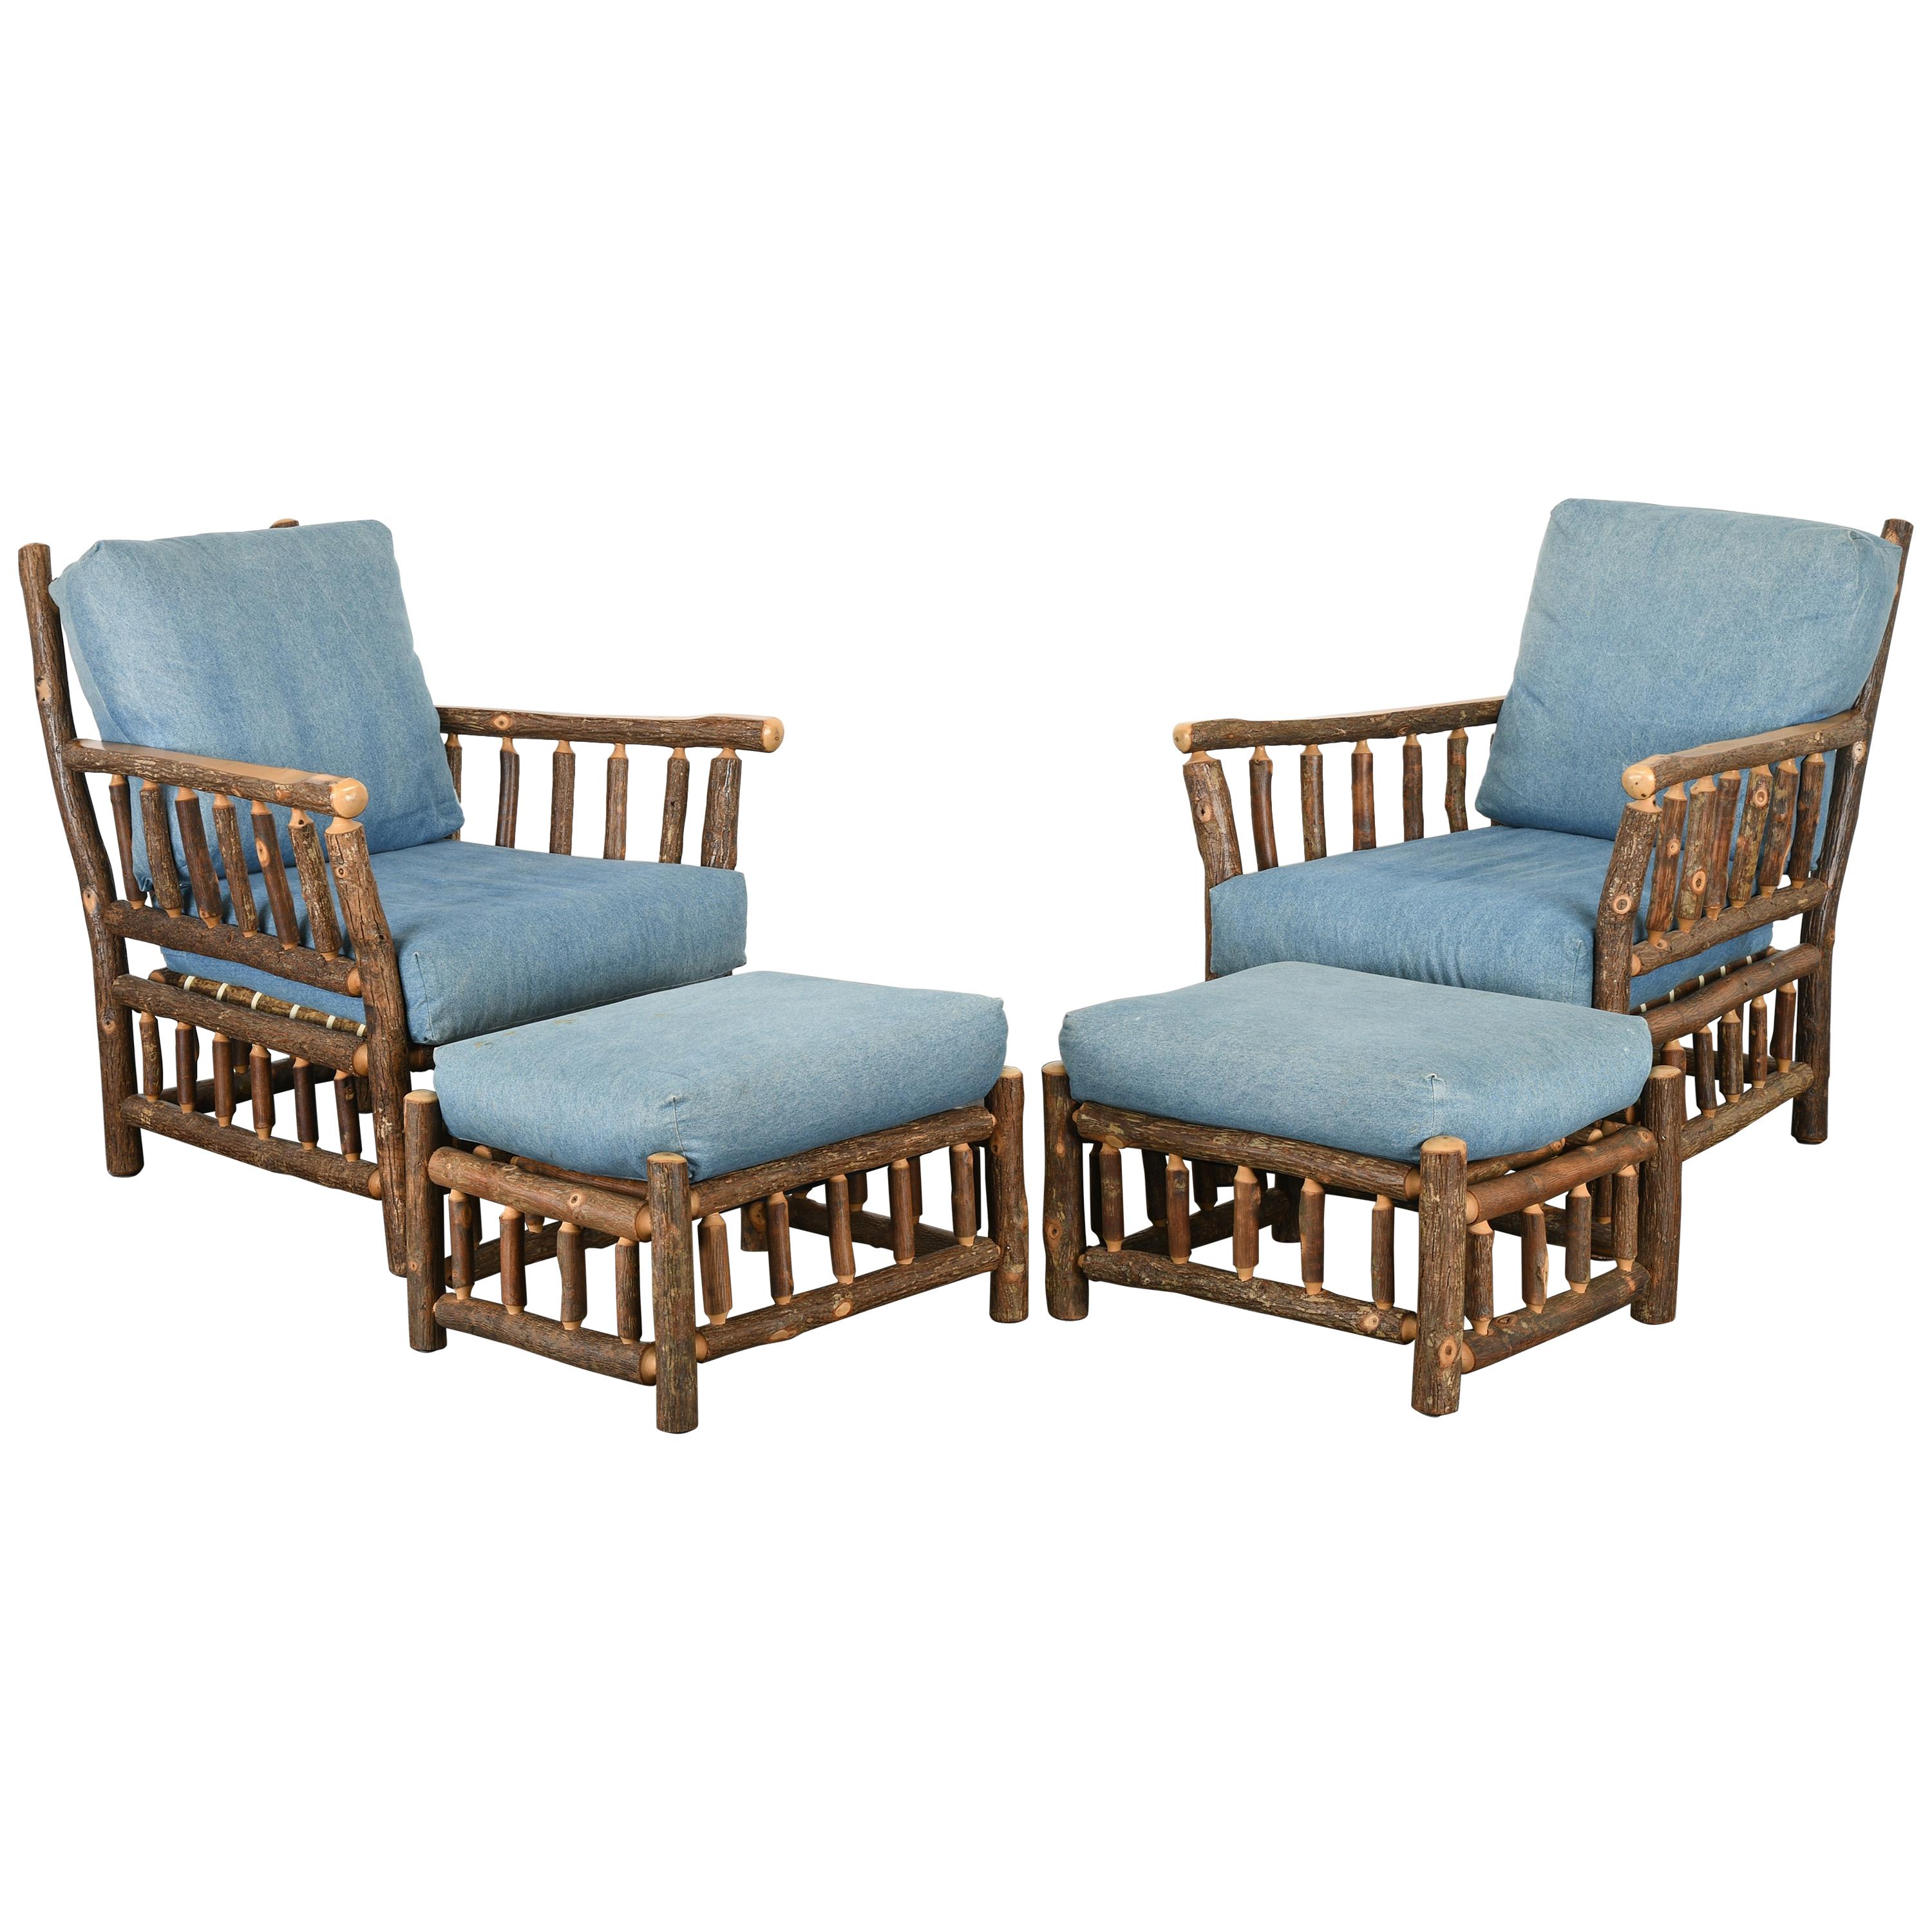 Pair of Old Hickory "Asheville" Chairs and Ottomans, 20th Century